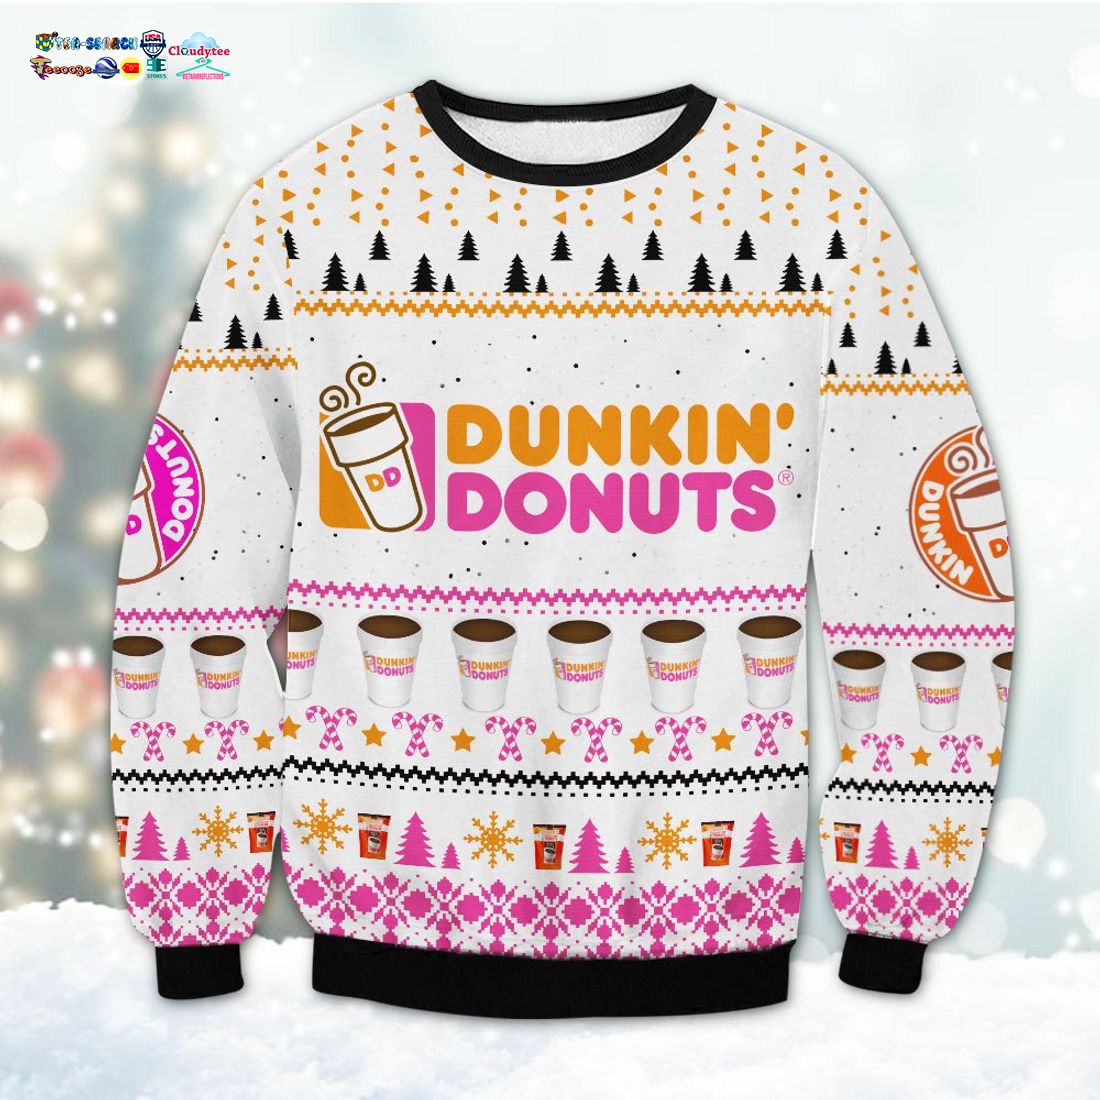 Dunkin’ Donuts Ver 2 Ugly Christmas Sweater